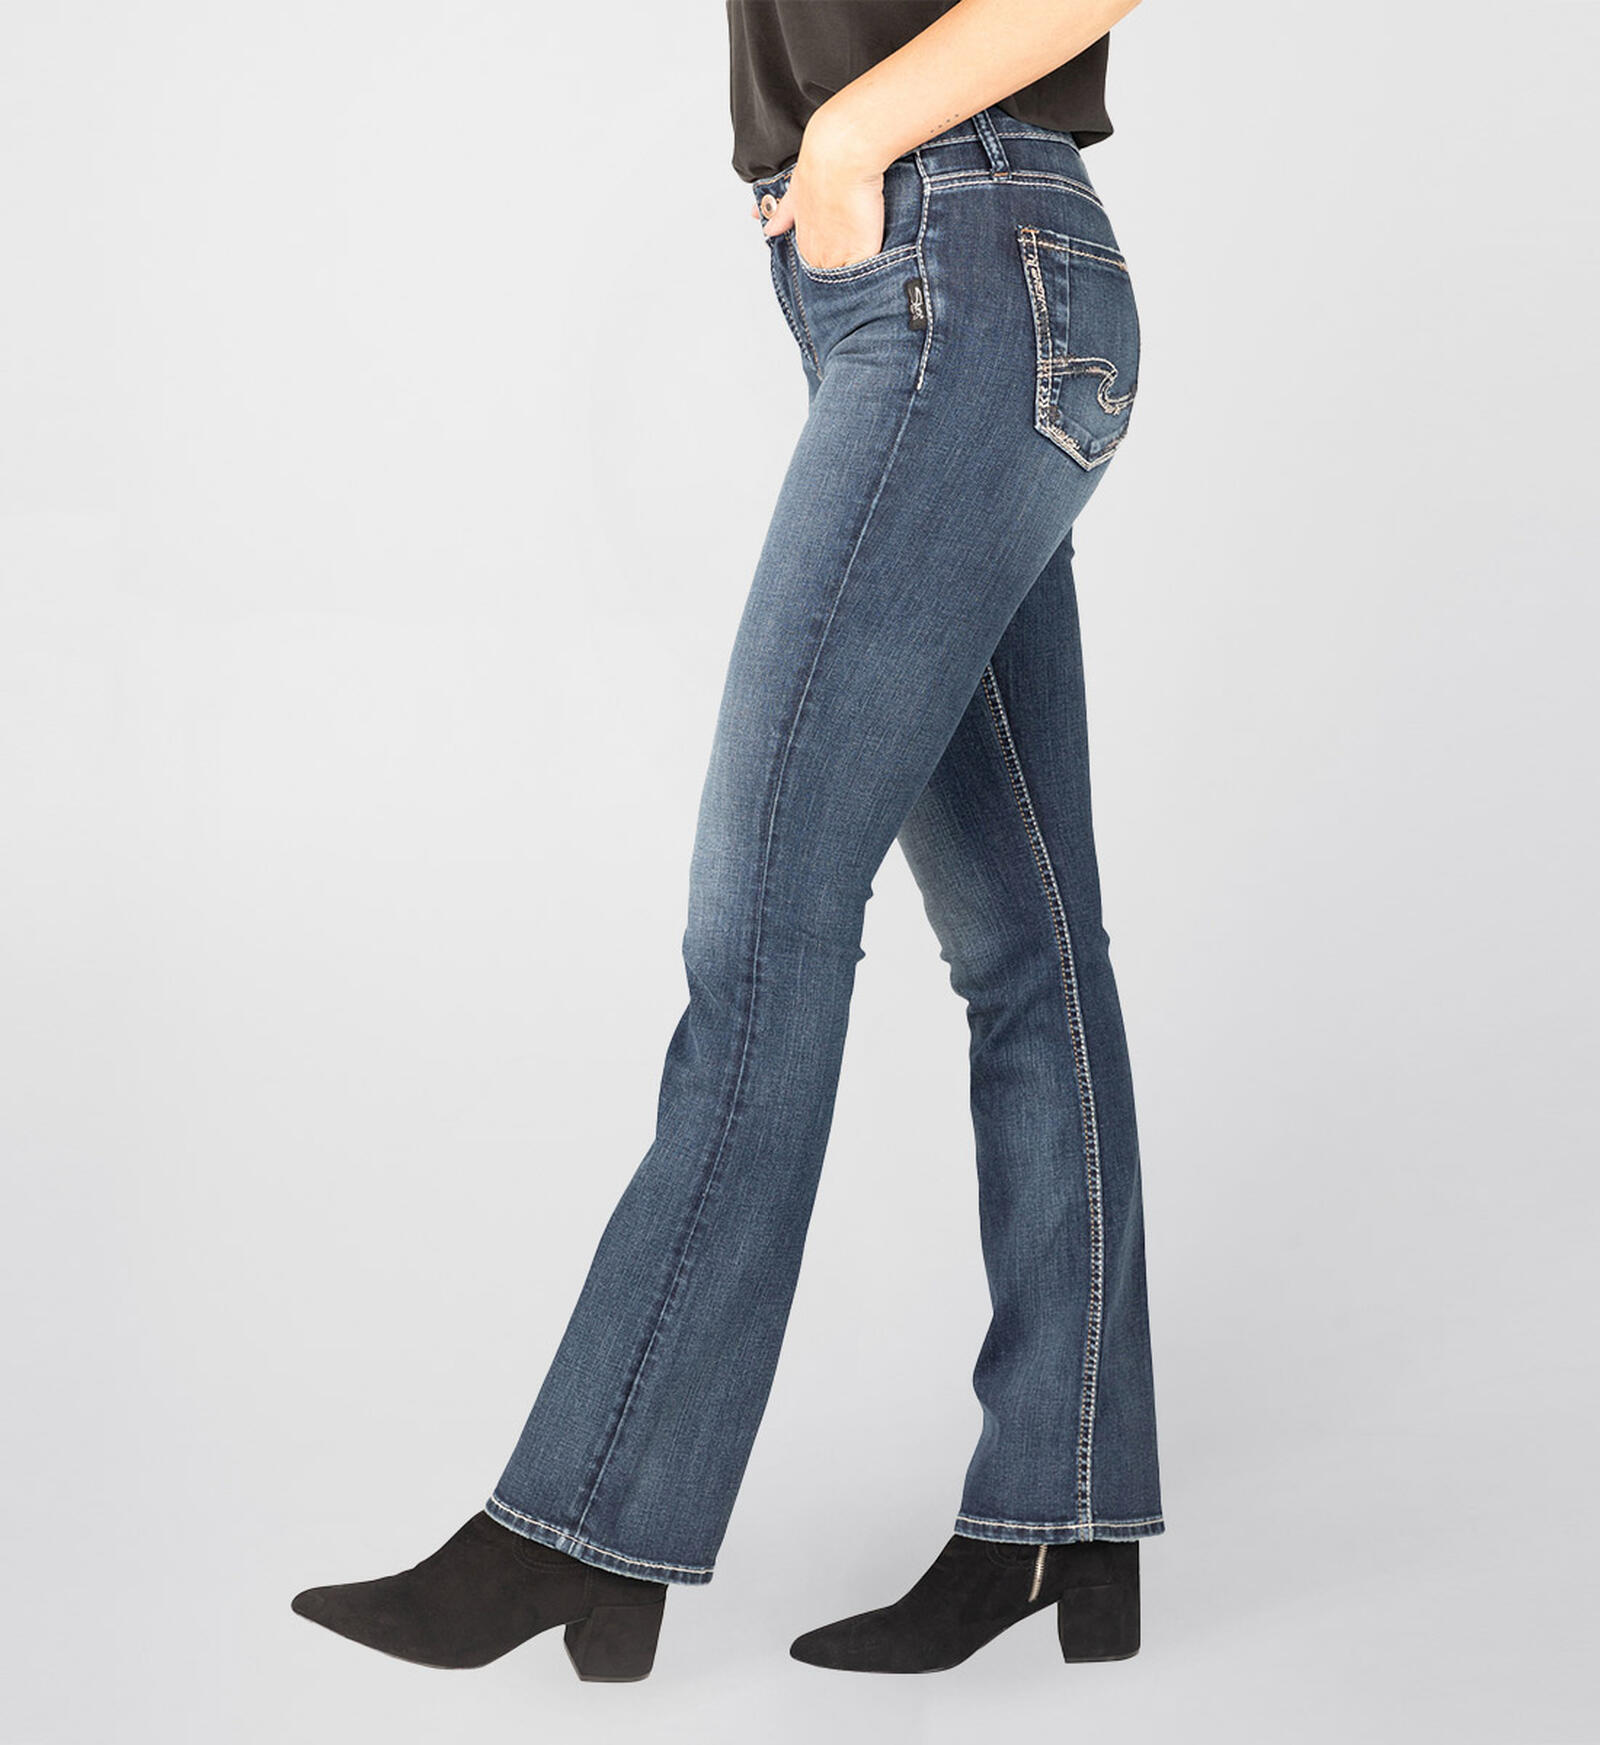 Buy Avery High Rise Slim Bootcut Jeans for CAD 118.00